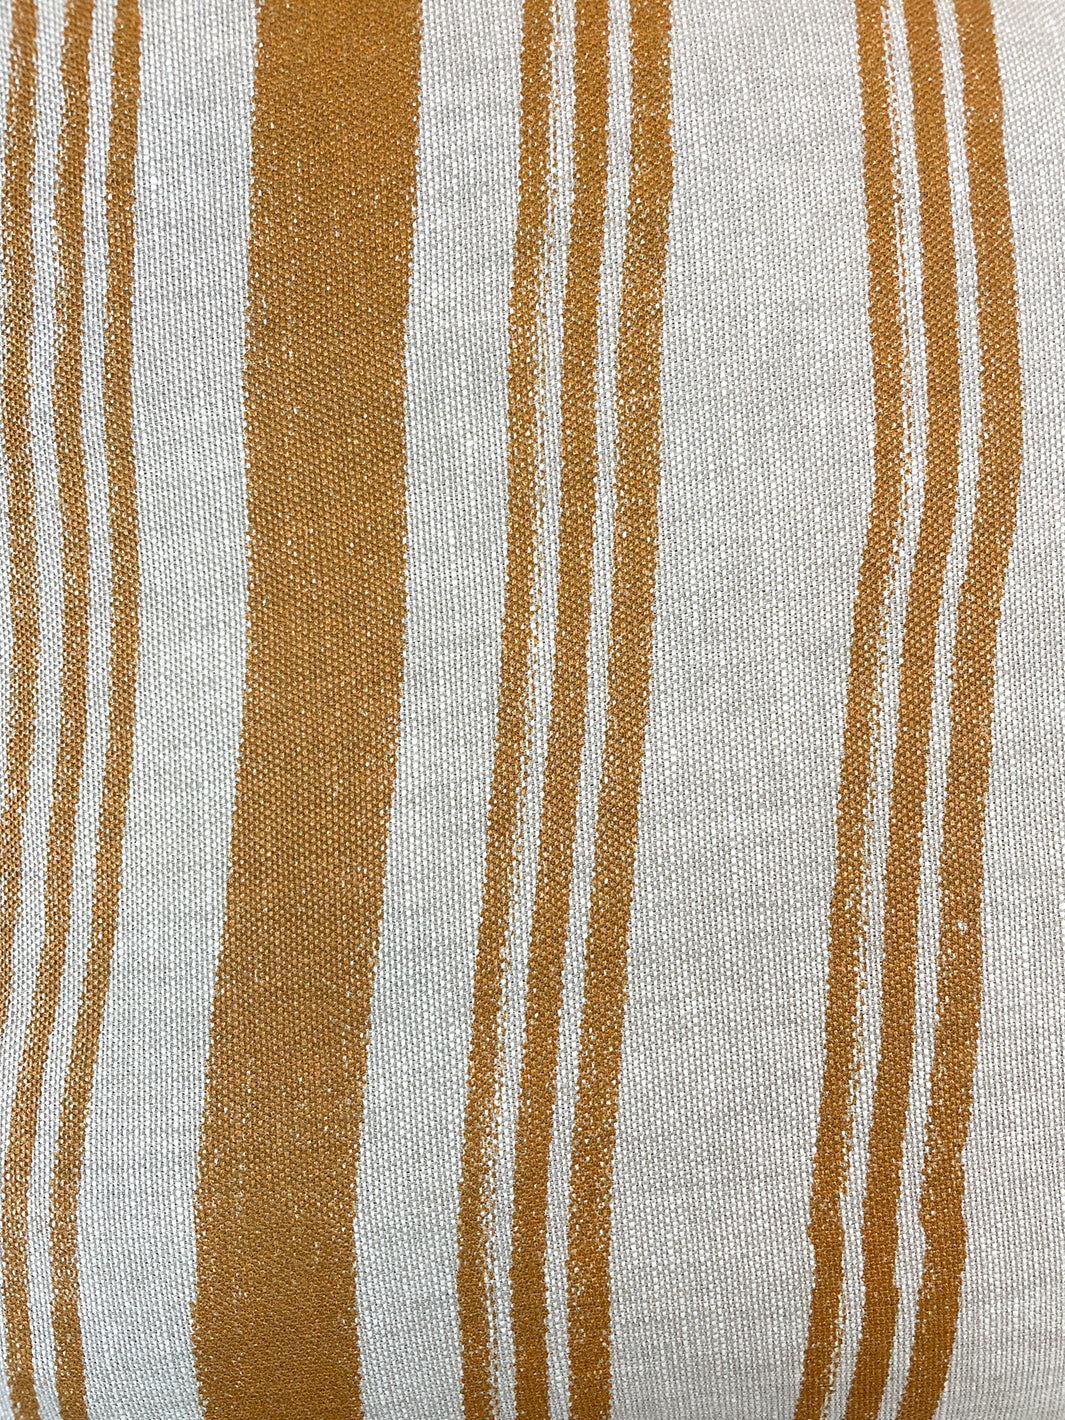 'Painted Stripes' Throw Pillow by Nathan Turner - Terracotta on Flax Linen